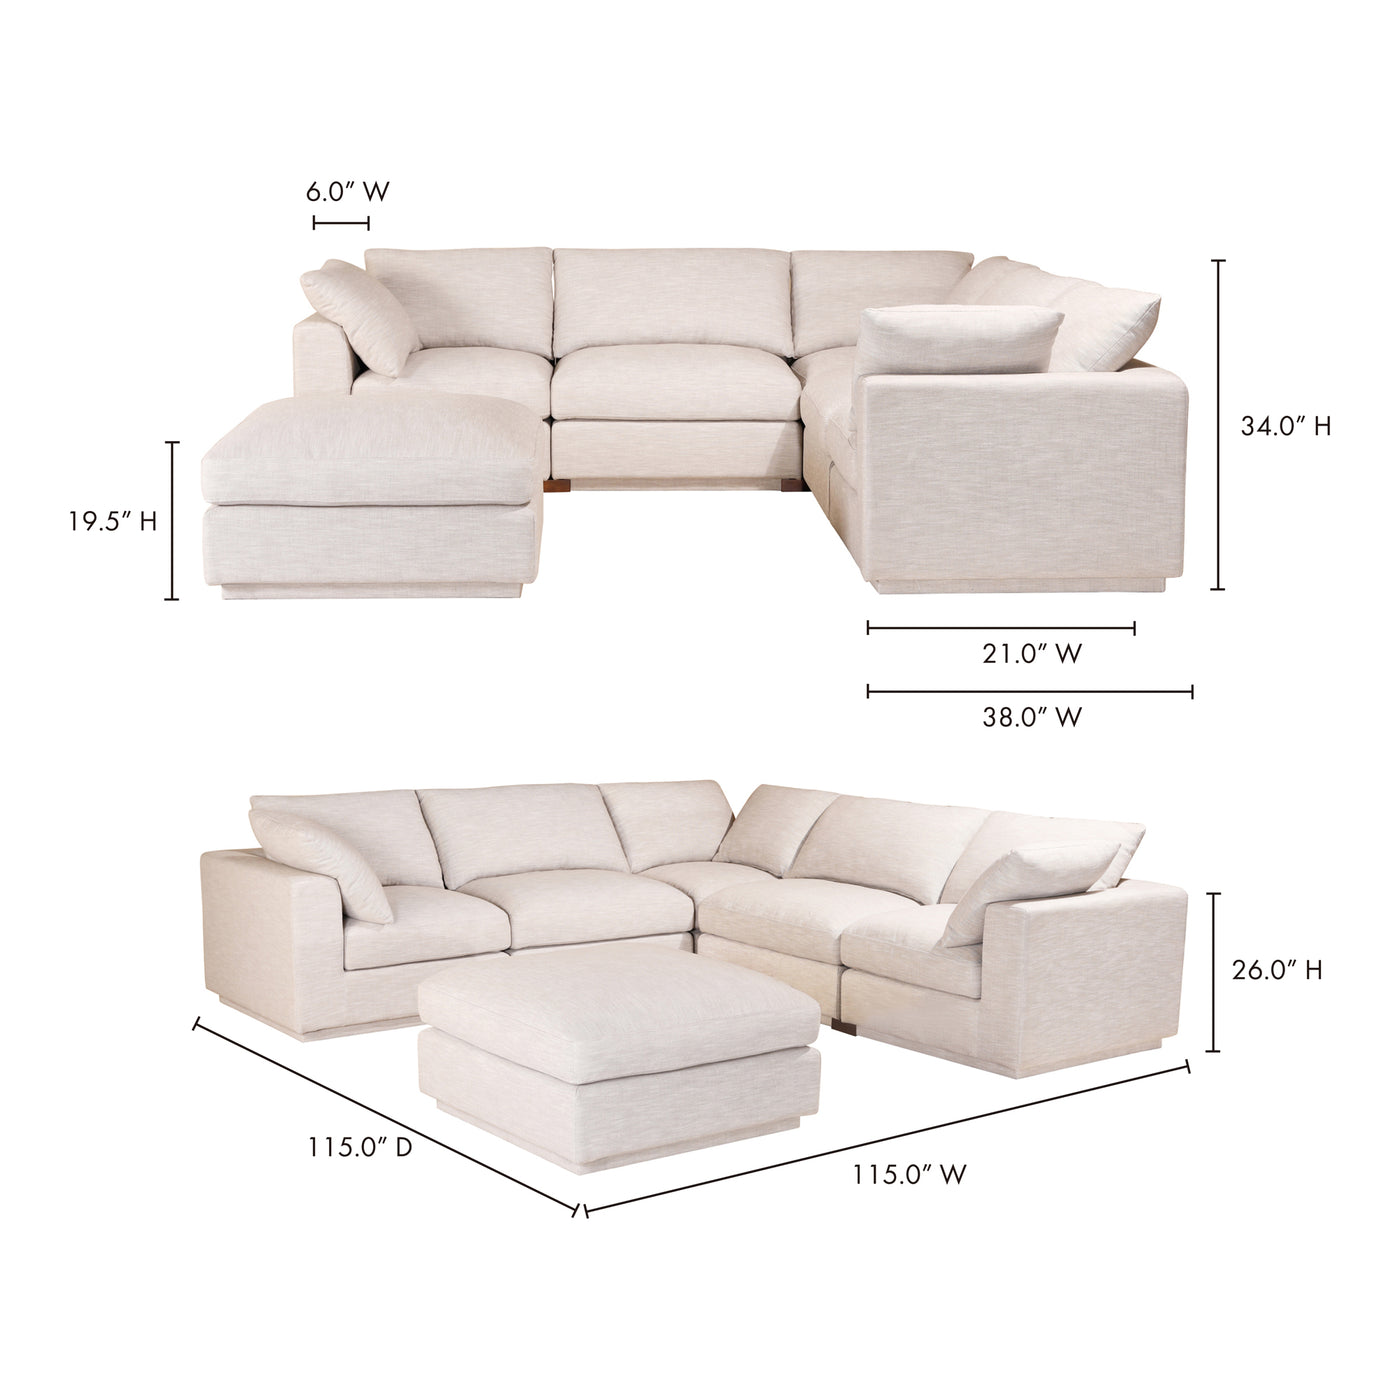 The Justin modular sectional is the ultimate seating area. It showcases two large chaises in its contemporary modern desig...